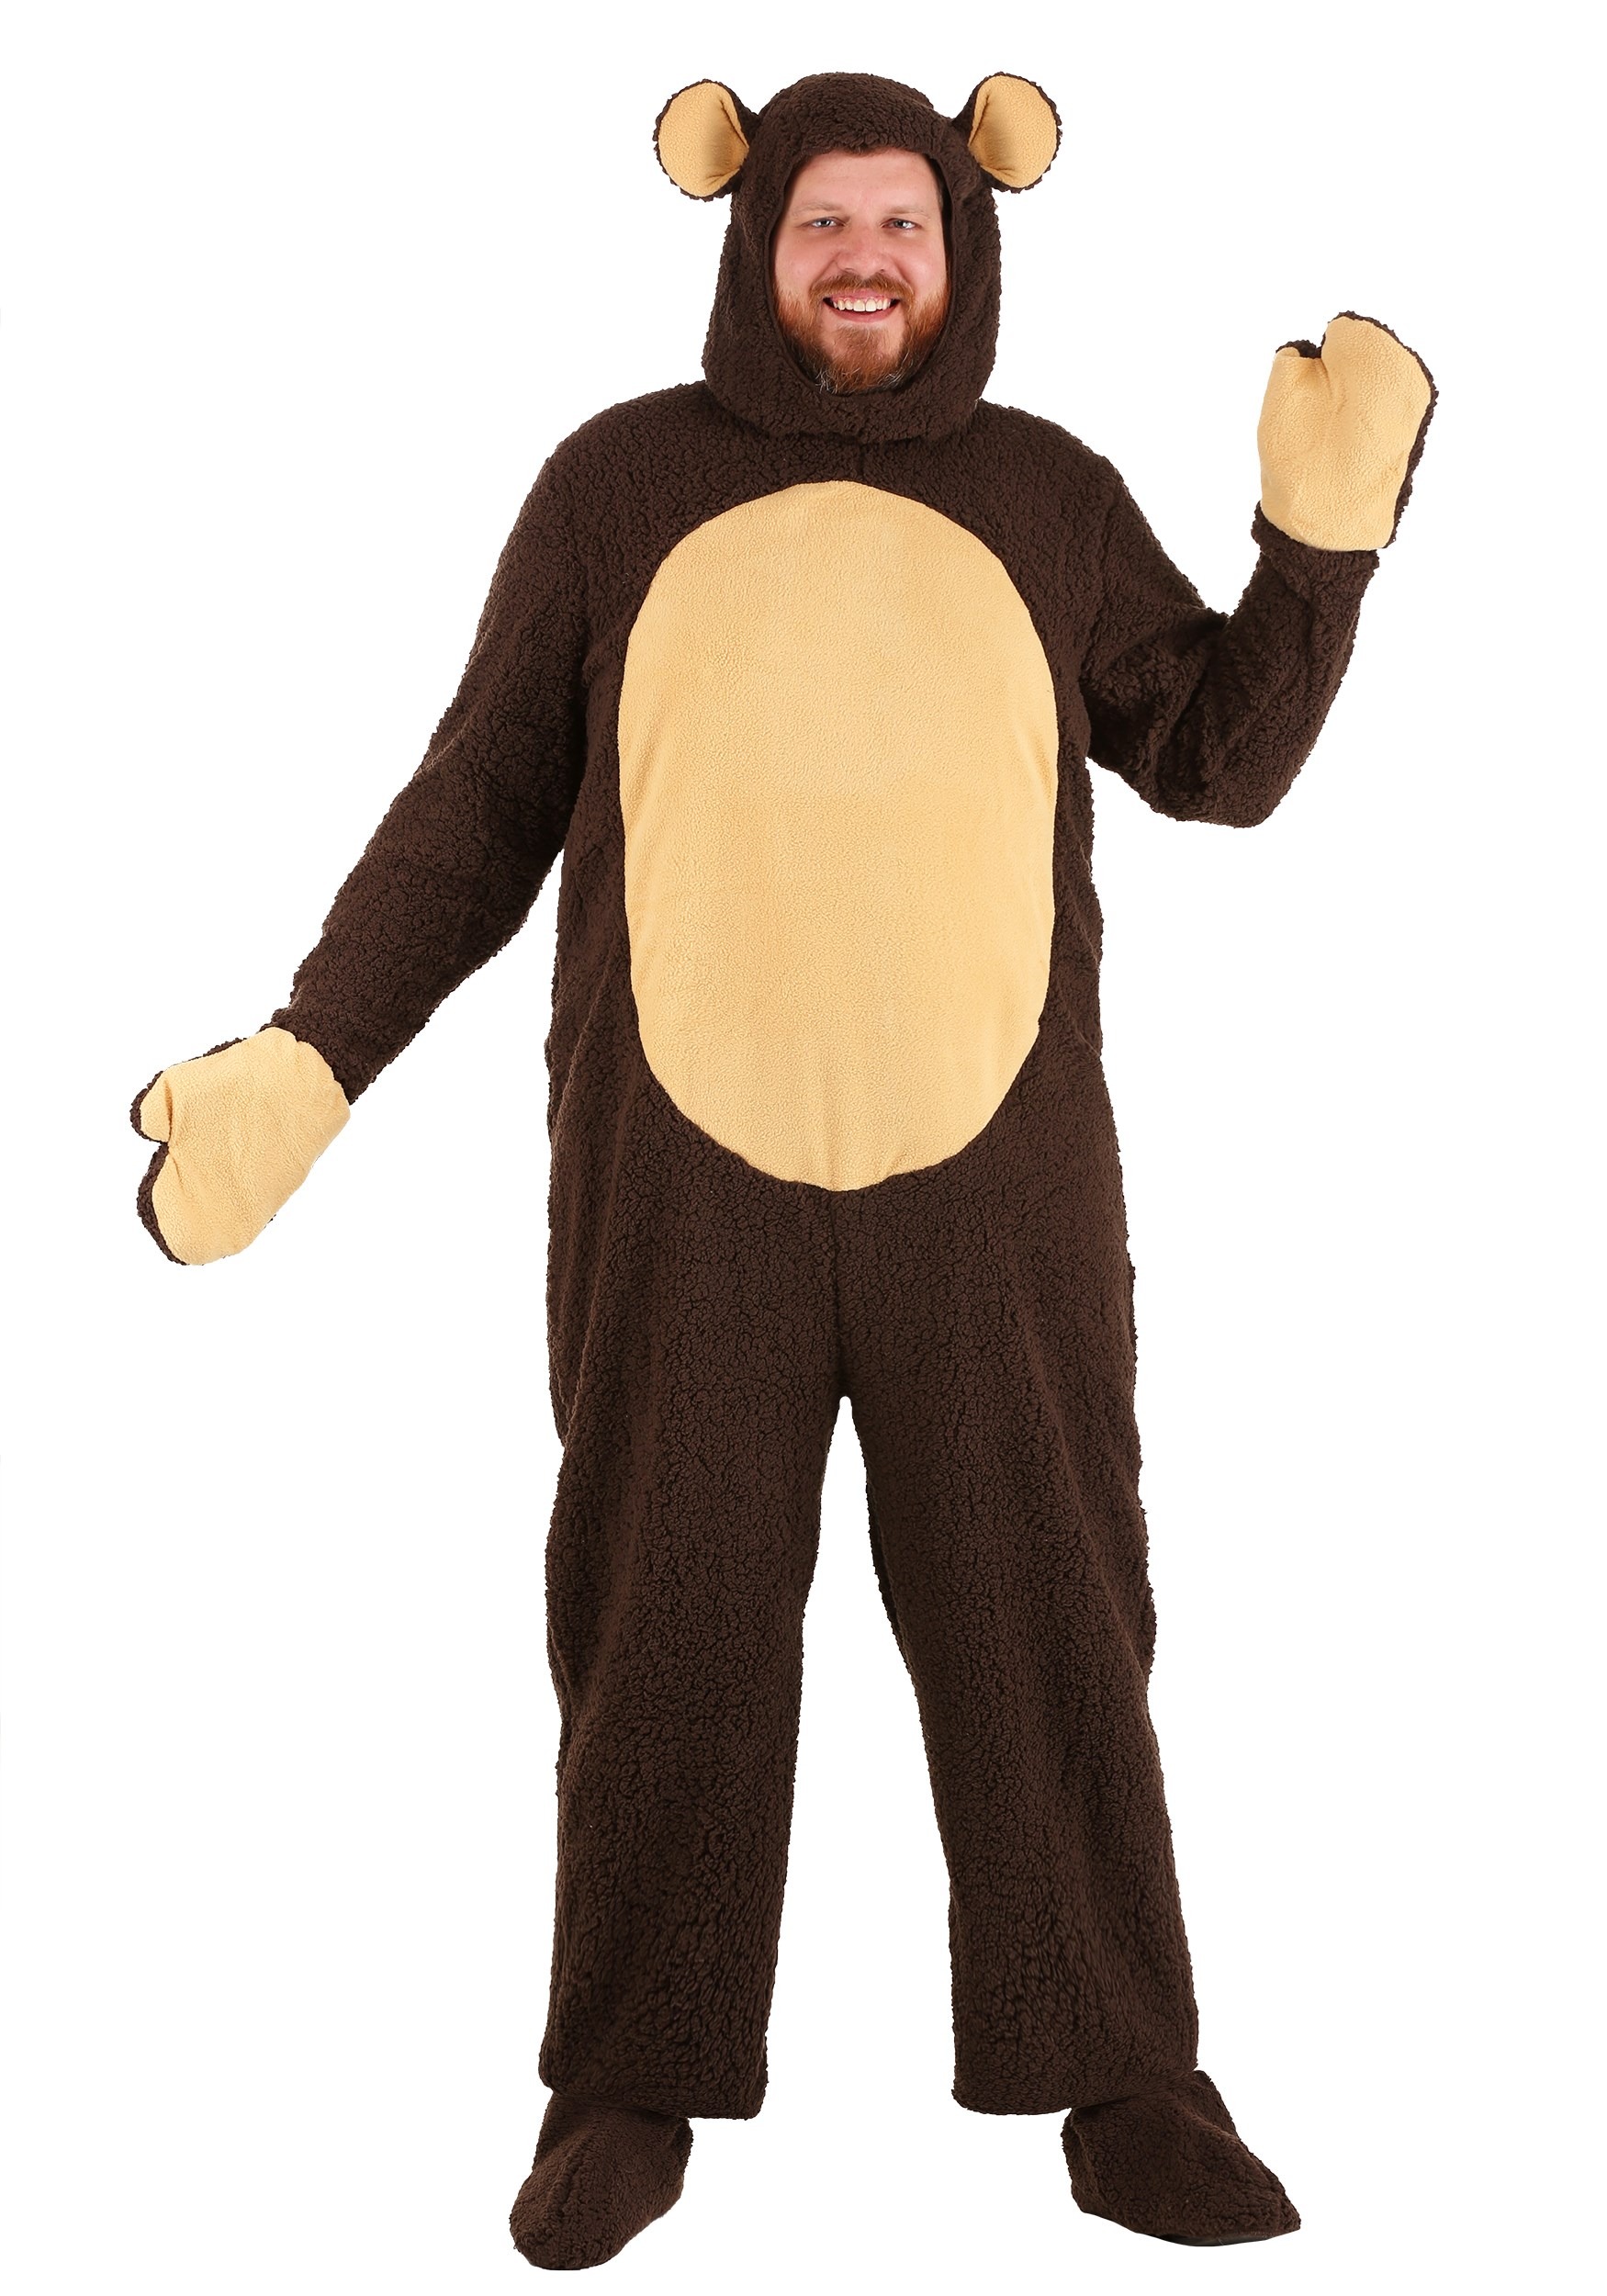 Storybook Bear Costume for Adults